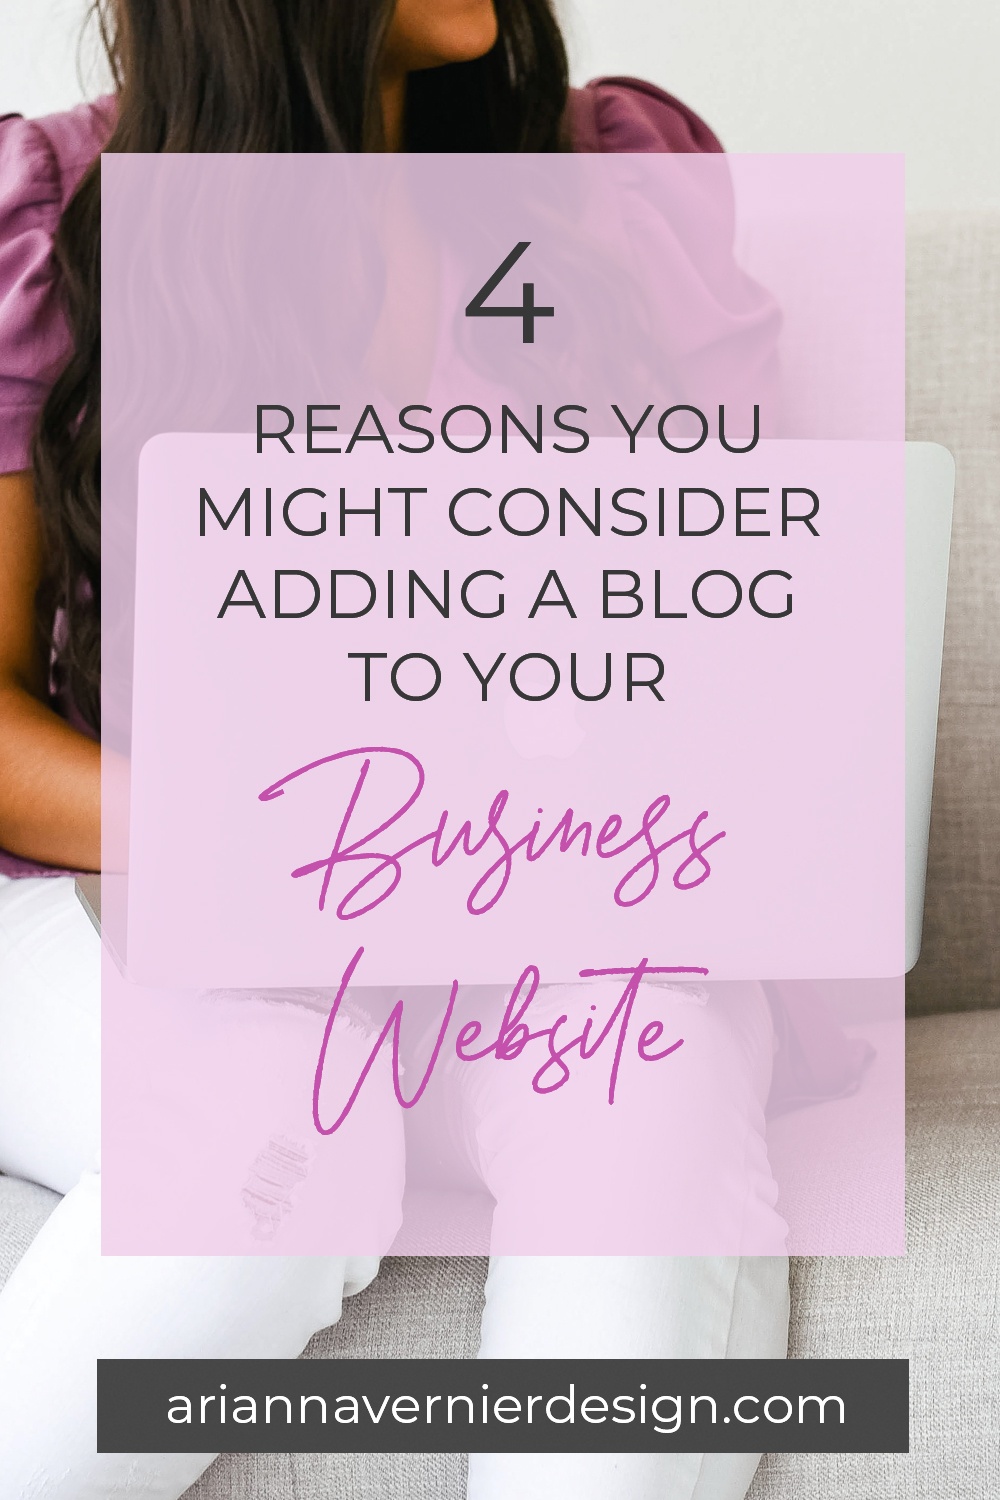 Pinterest pin with a woman on a laptop in the background, with a light purple rectangle over top, and the title "4 Reasons You Might Consider Adding a Blog to Your Business Website"